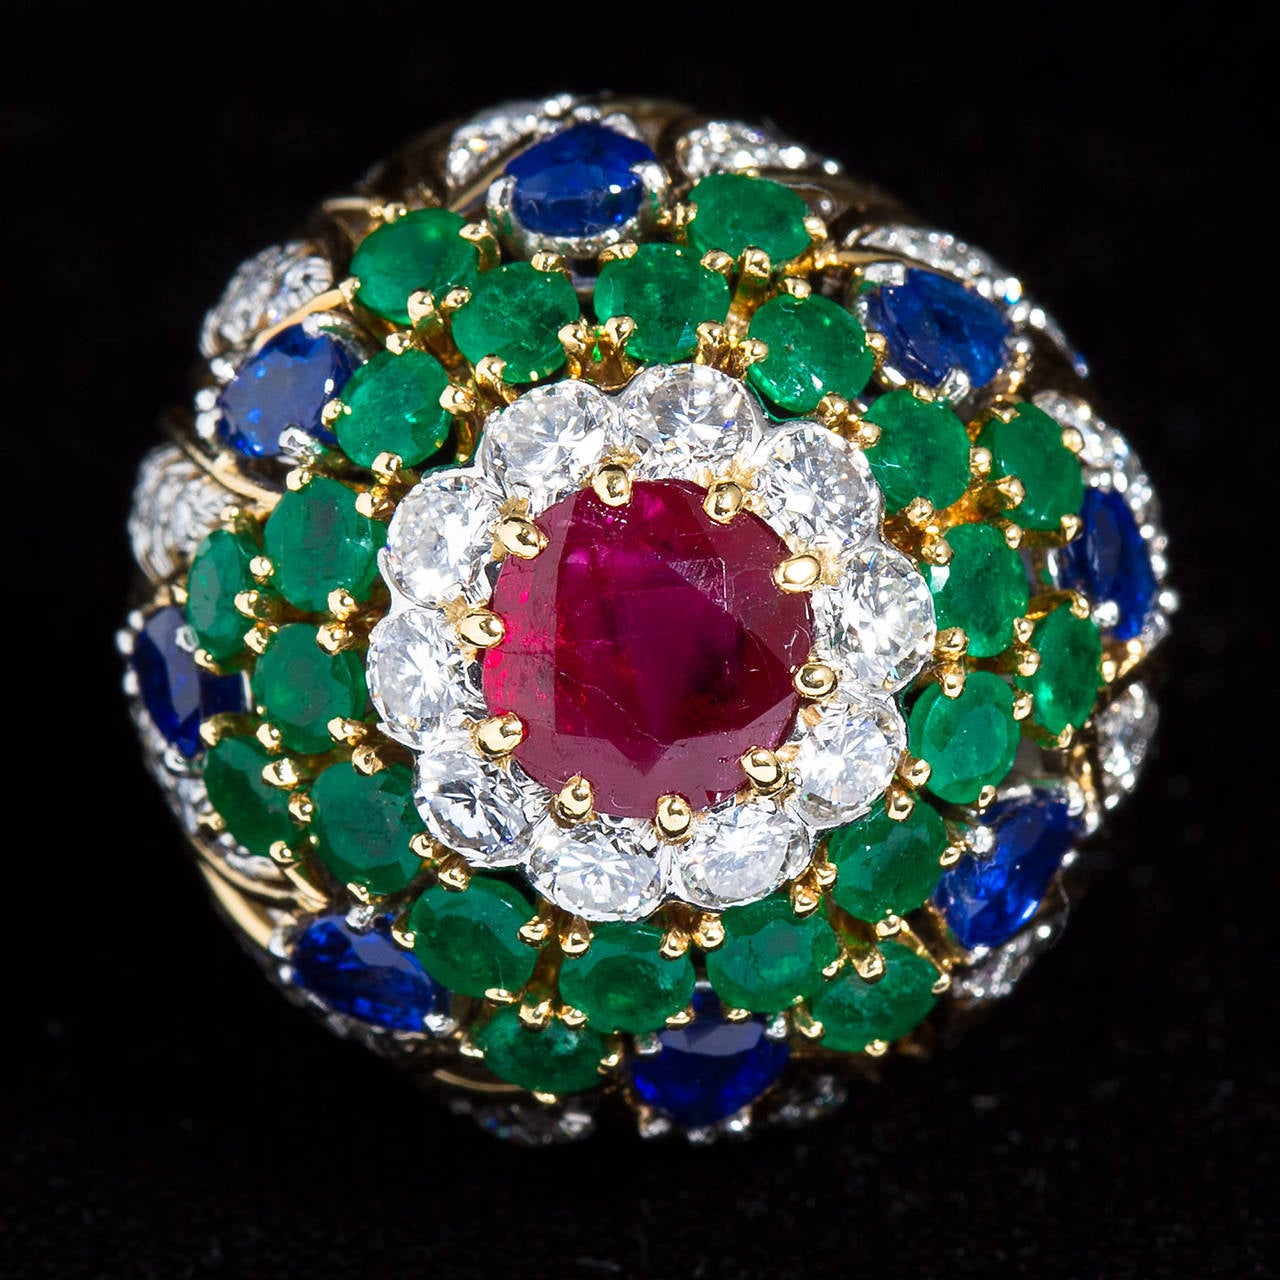 A diamond and multi-gem in 18k gold elaborate dome ring by David Webb.
Contains round brilliant diamonds, sapphires and emeralds with one center round brilliant cut ruby.

Dealer ref No. 6527